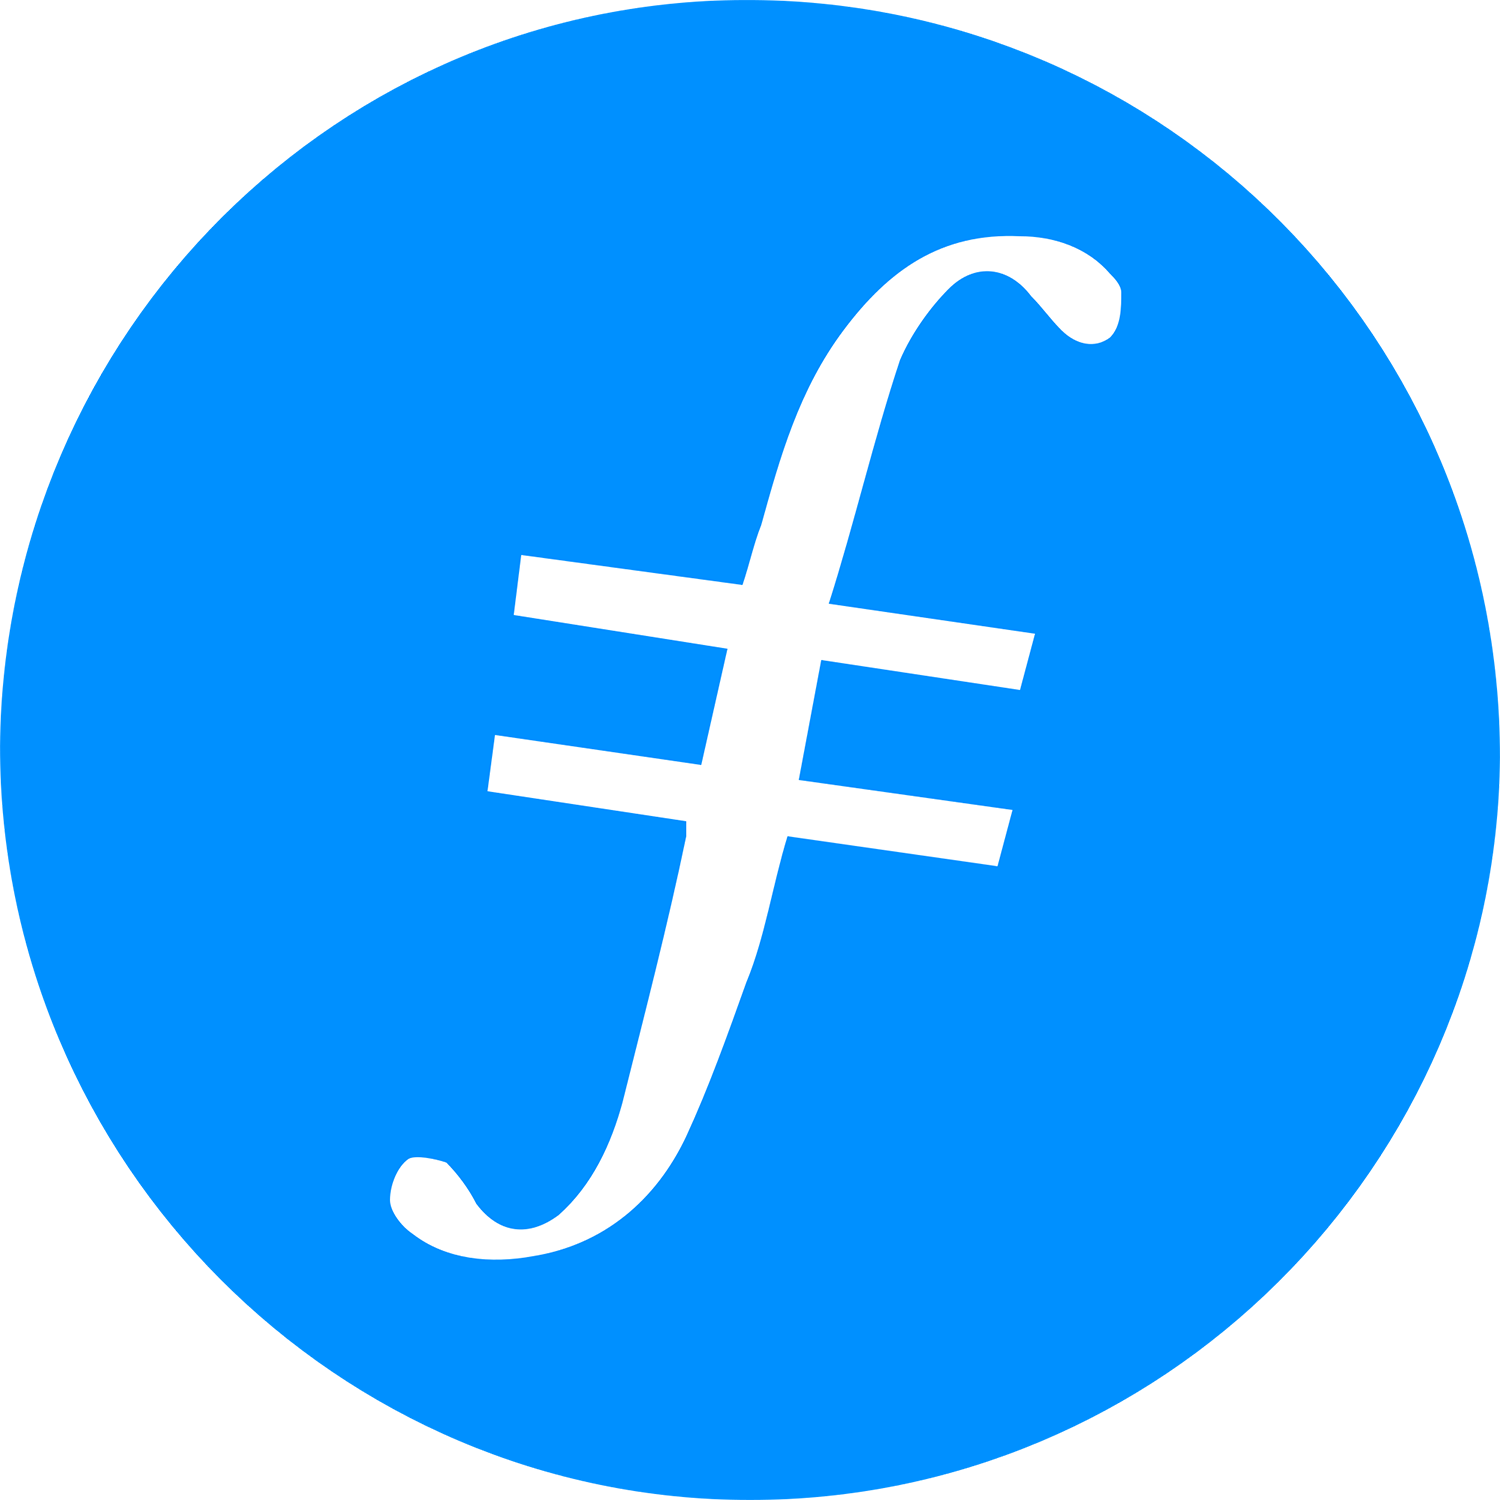 Filecoin logo icon - a blue circle with a lower-cased "f" with two strokes across the center, resembling a currency symbol.